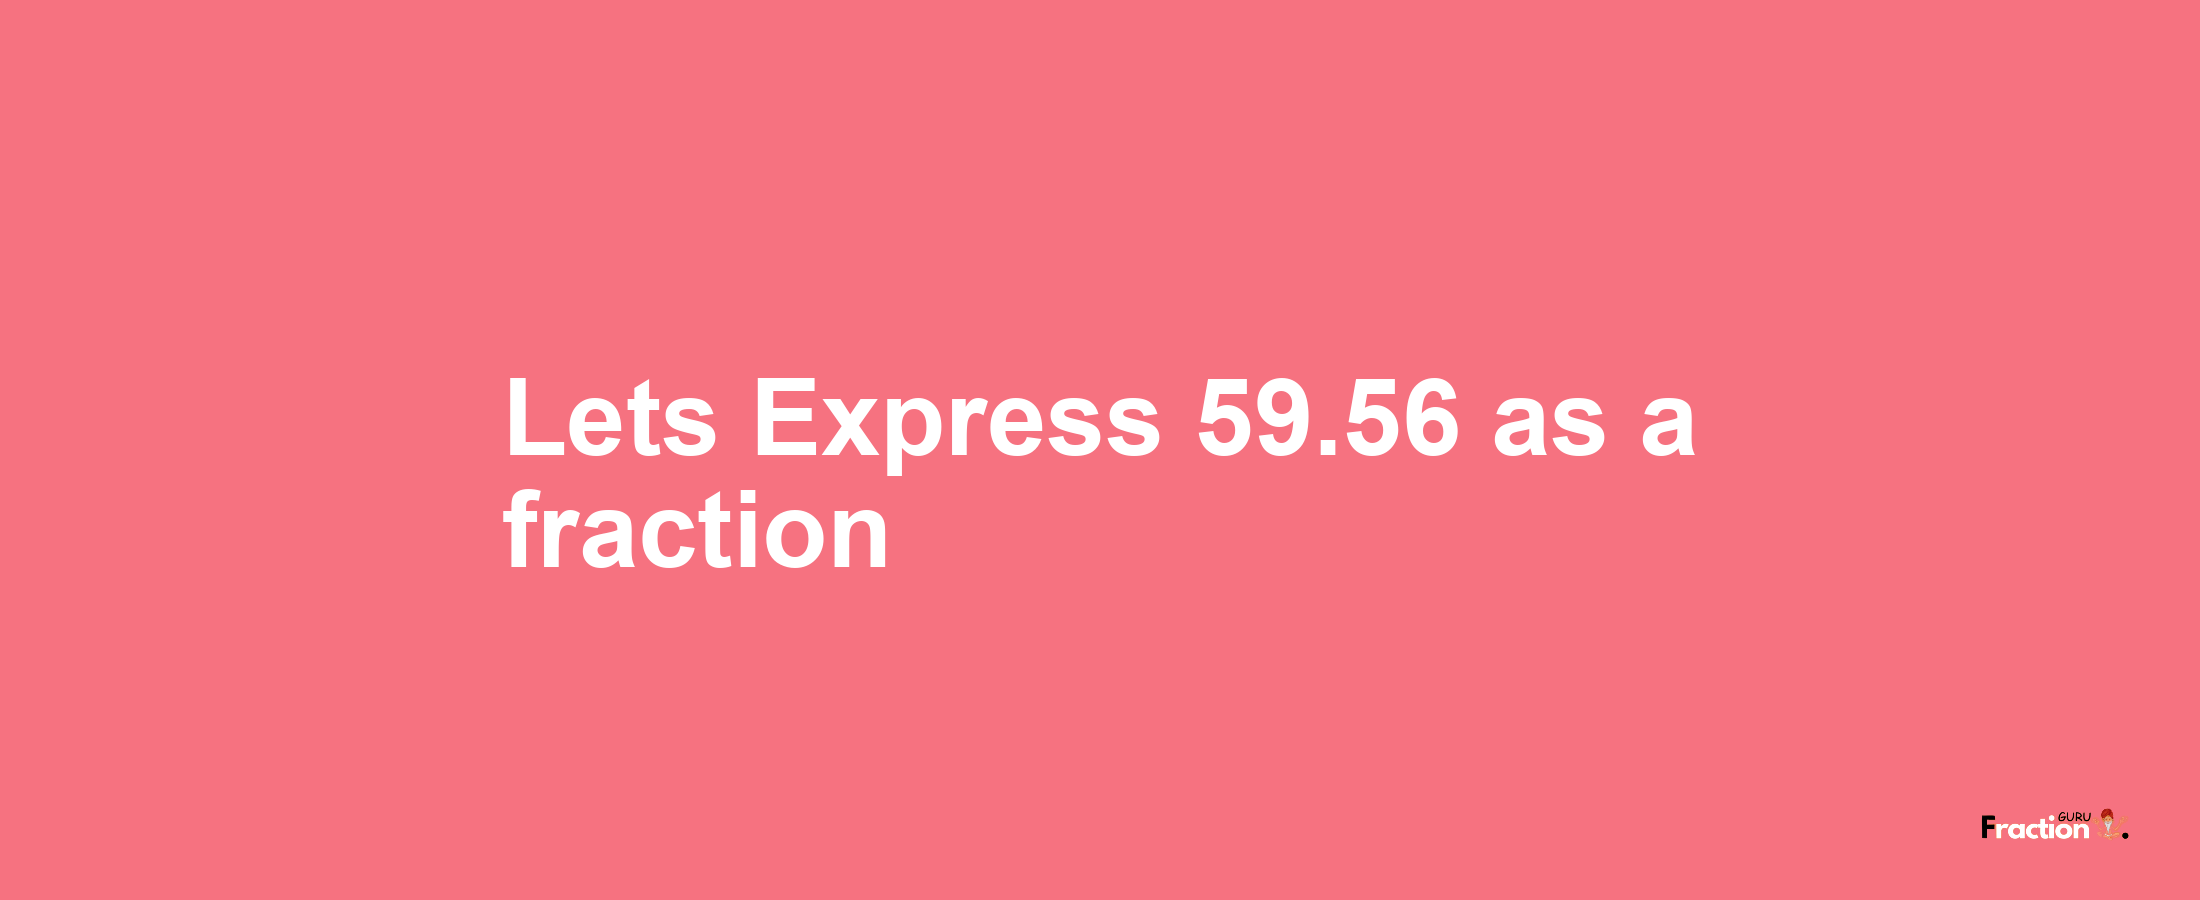 Lets Express 59.56 as afraction